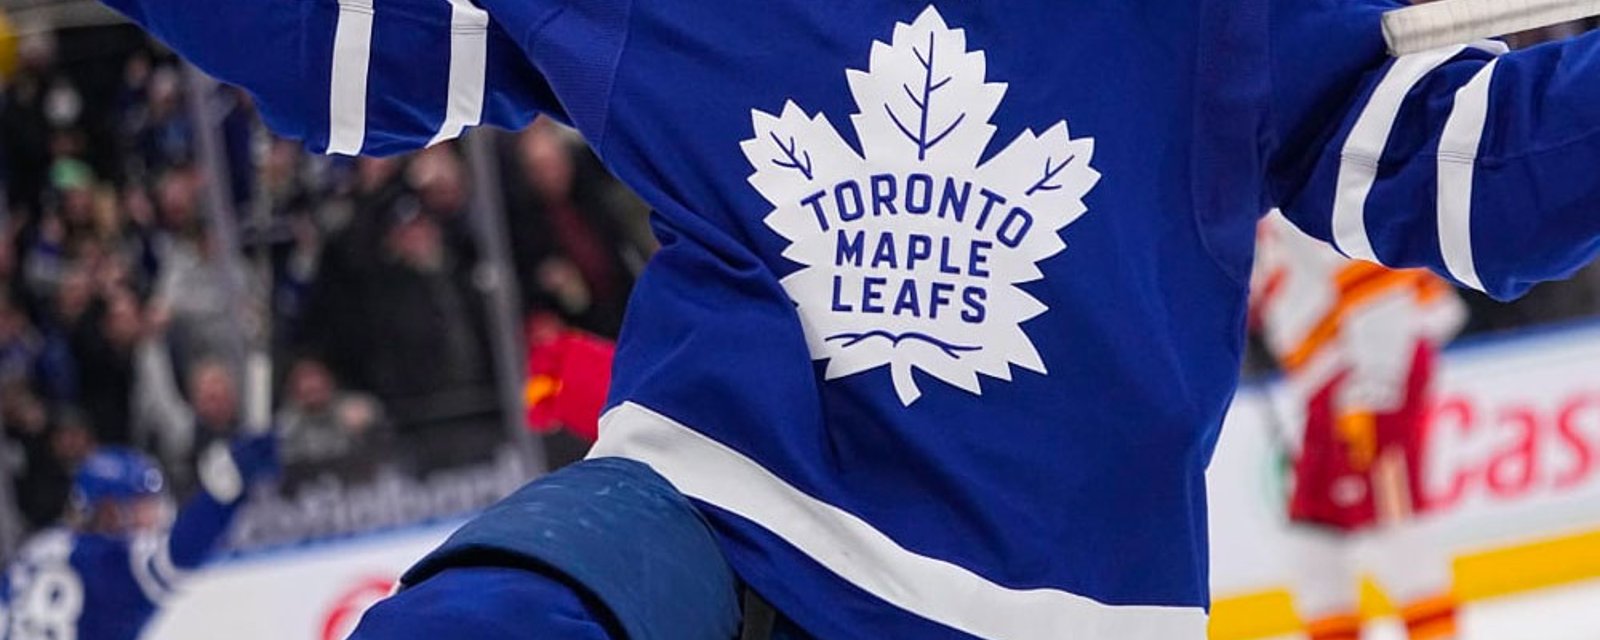 Leafs invite 6-foot-8, 245 pound monster to training camp